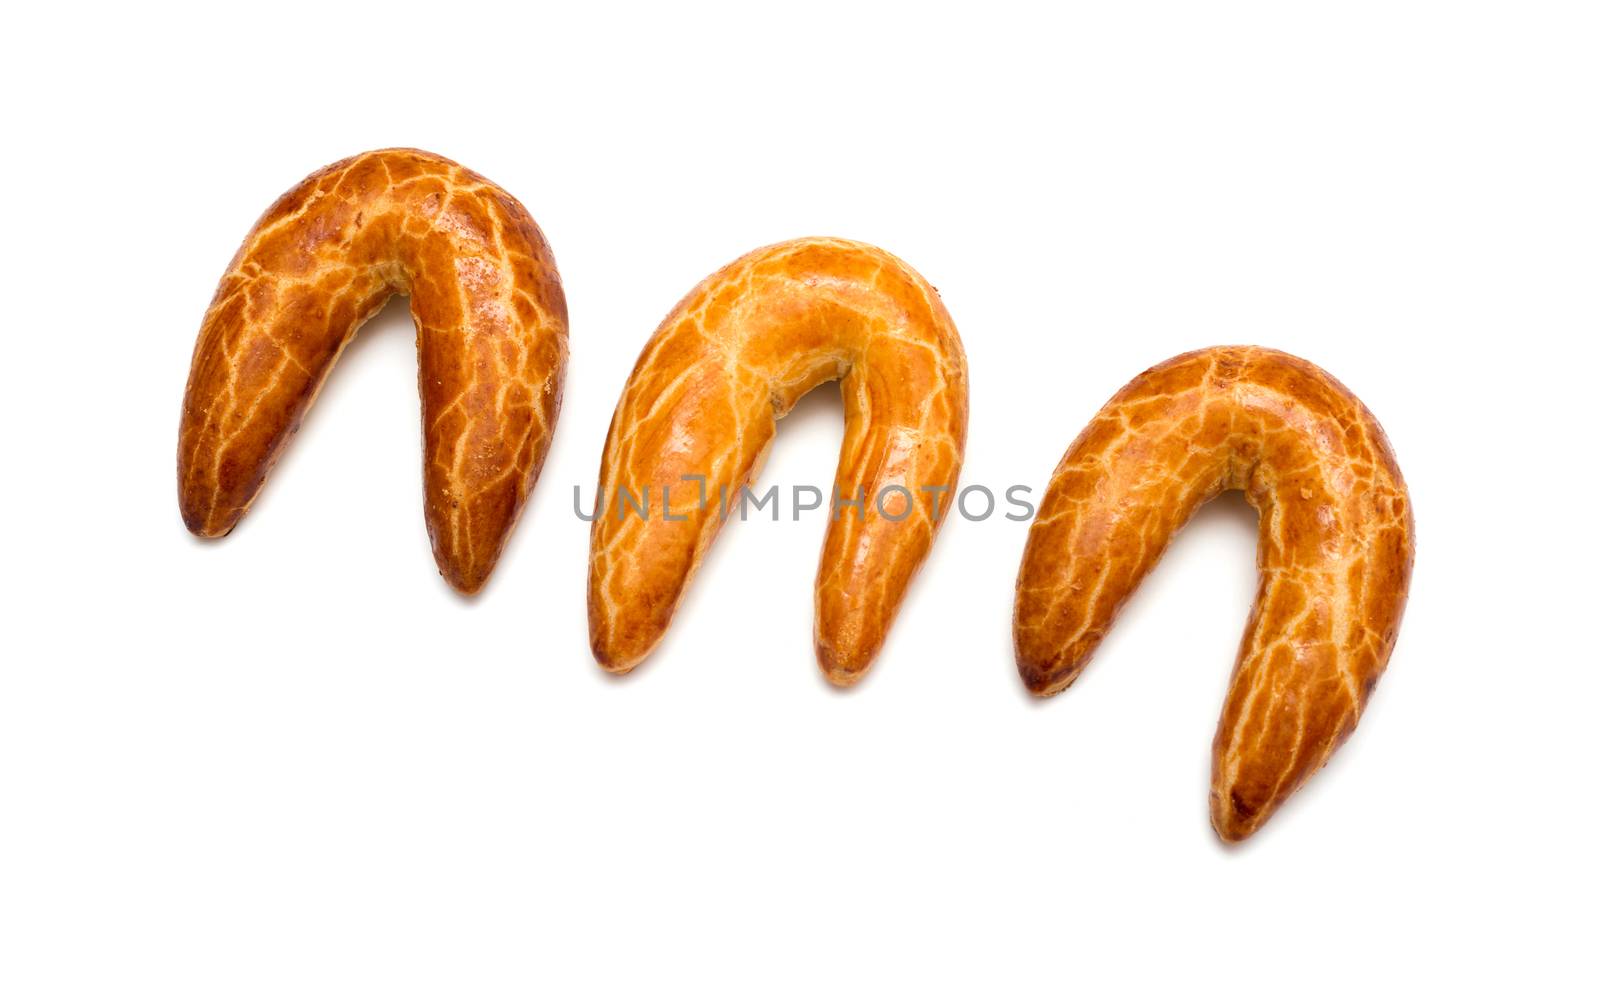 Fresh Bagels Isolated on a White Background